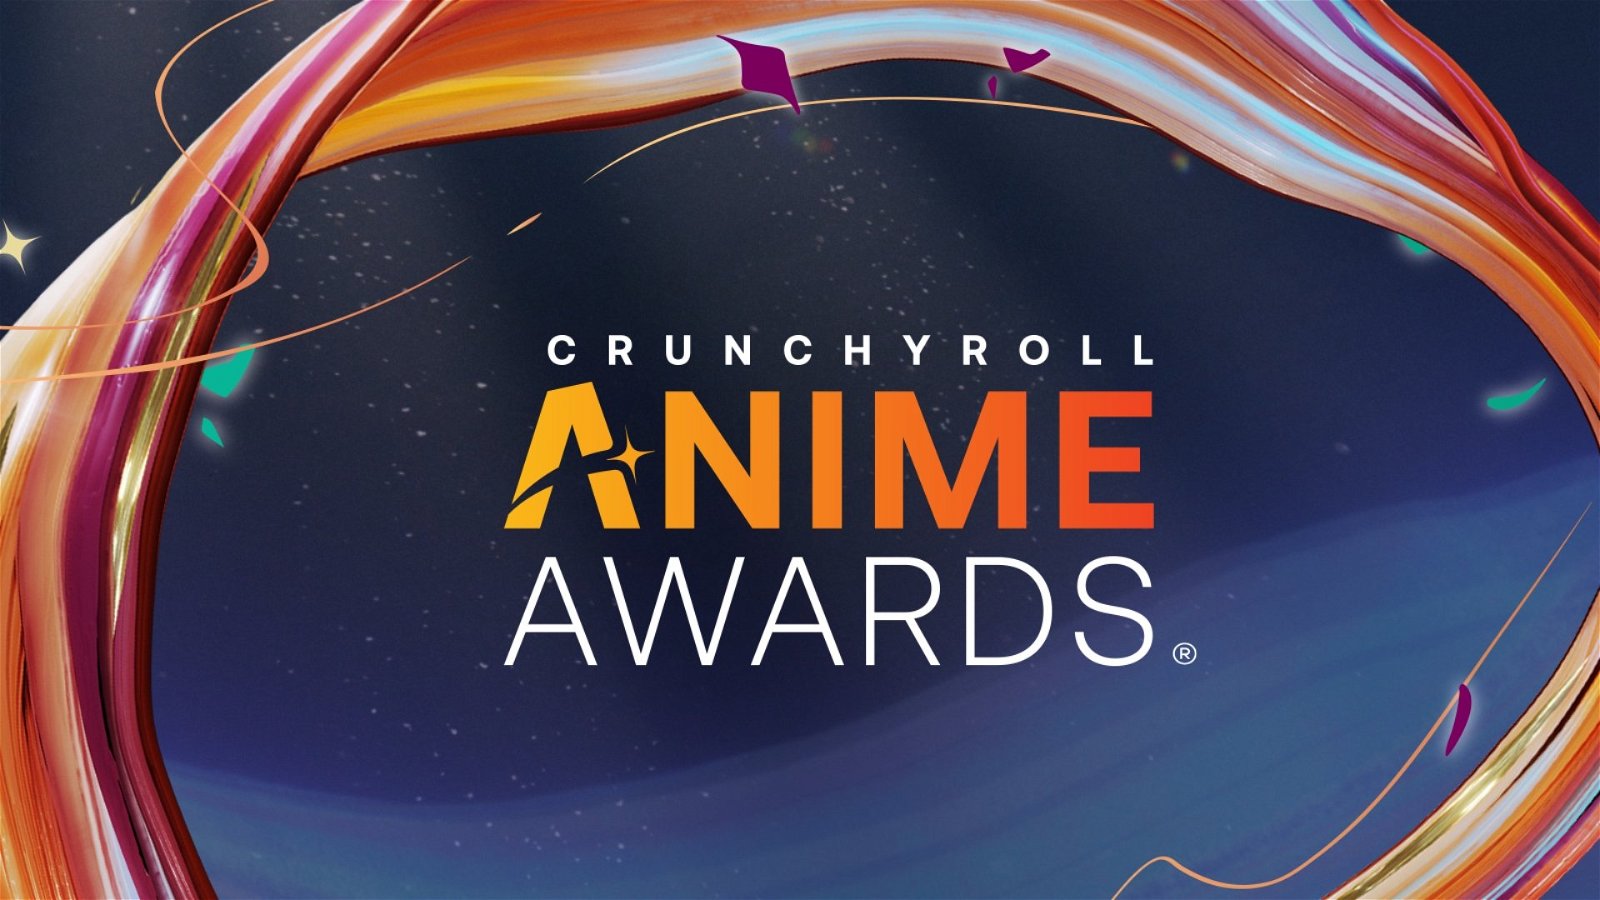 Crunchyroll Anime Awards nominations shockingly leave out fan favourites